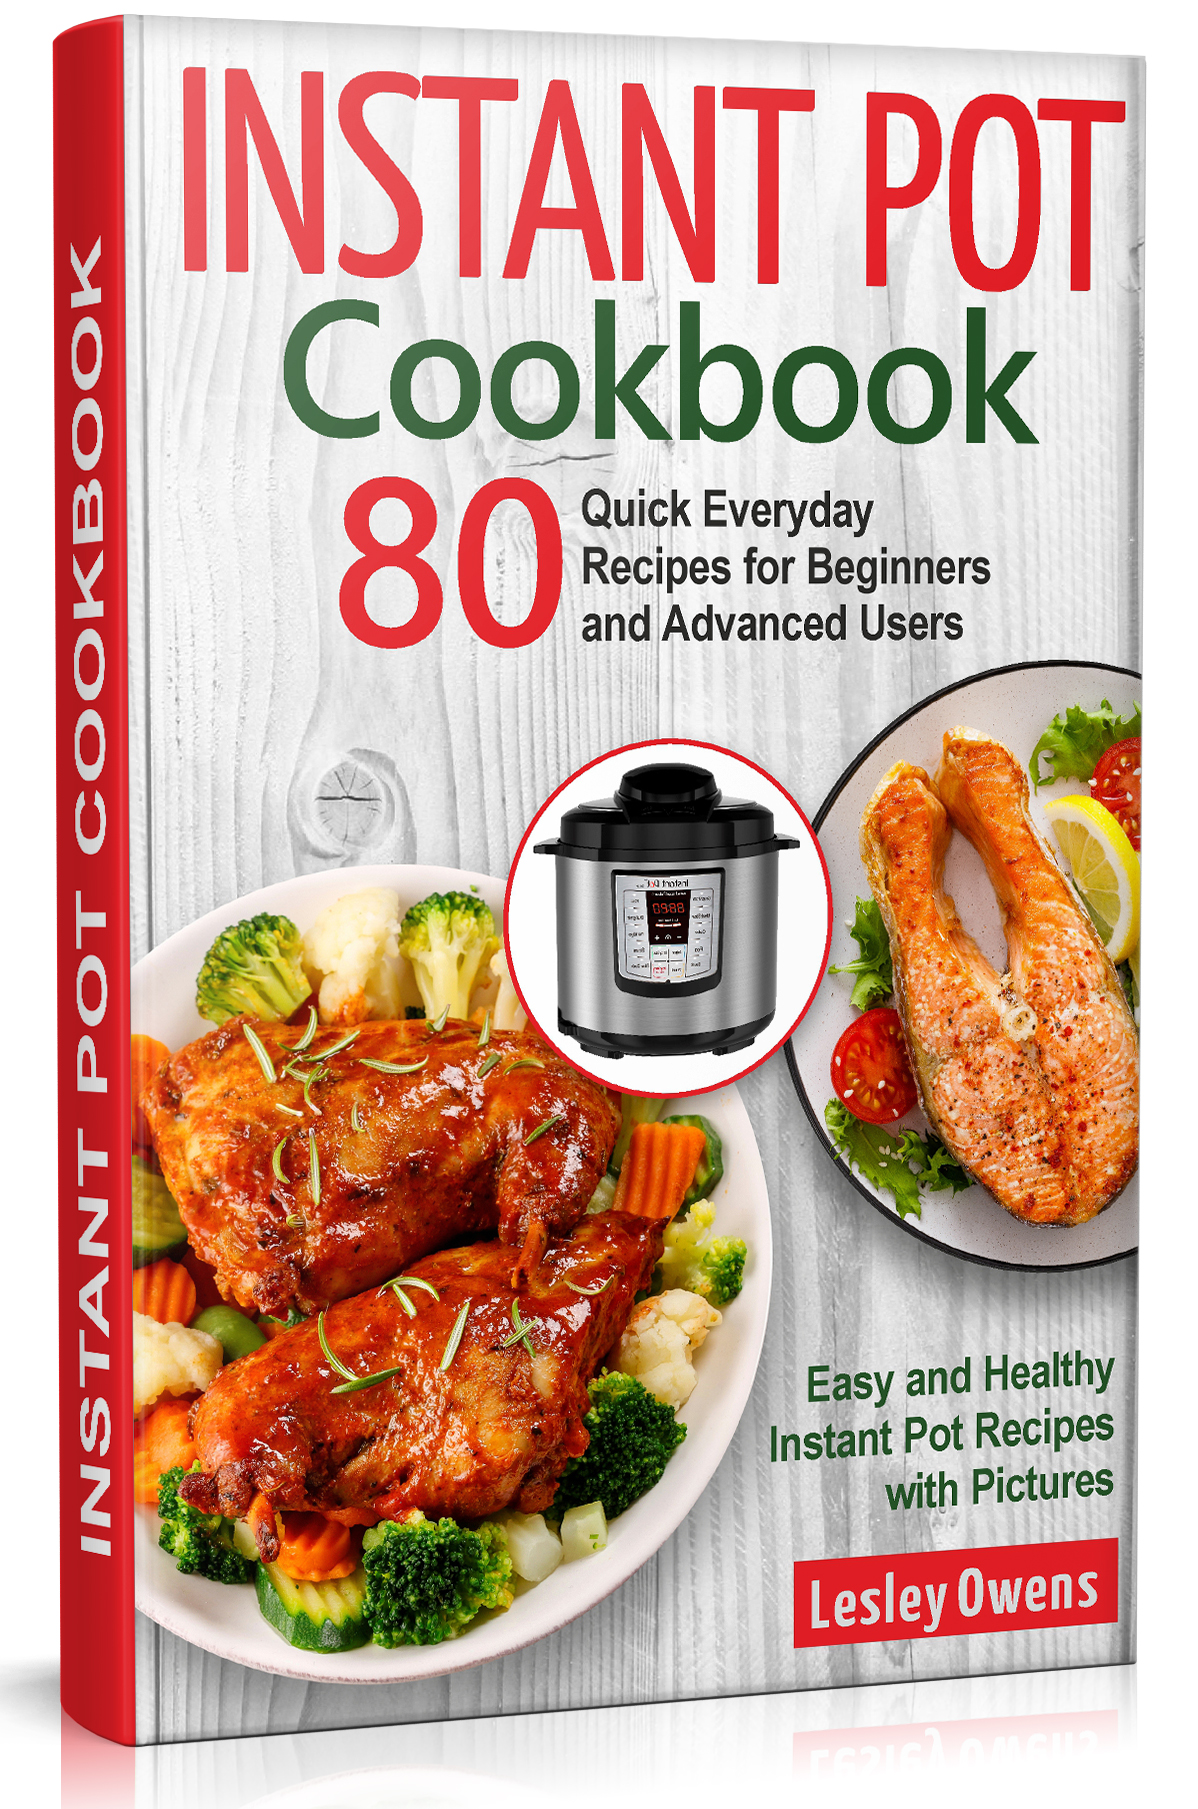 FREE: Instant Pot Cookbook: 80 Quick Everyday Recipes for Beginners and Advanced Users. Easy and Healthy Instant Pot Recipes with Pictures by Lesley Owens